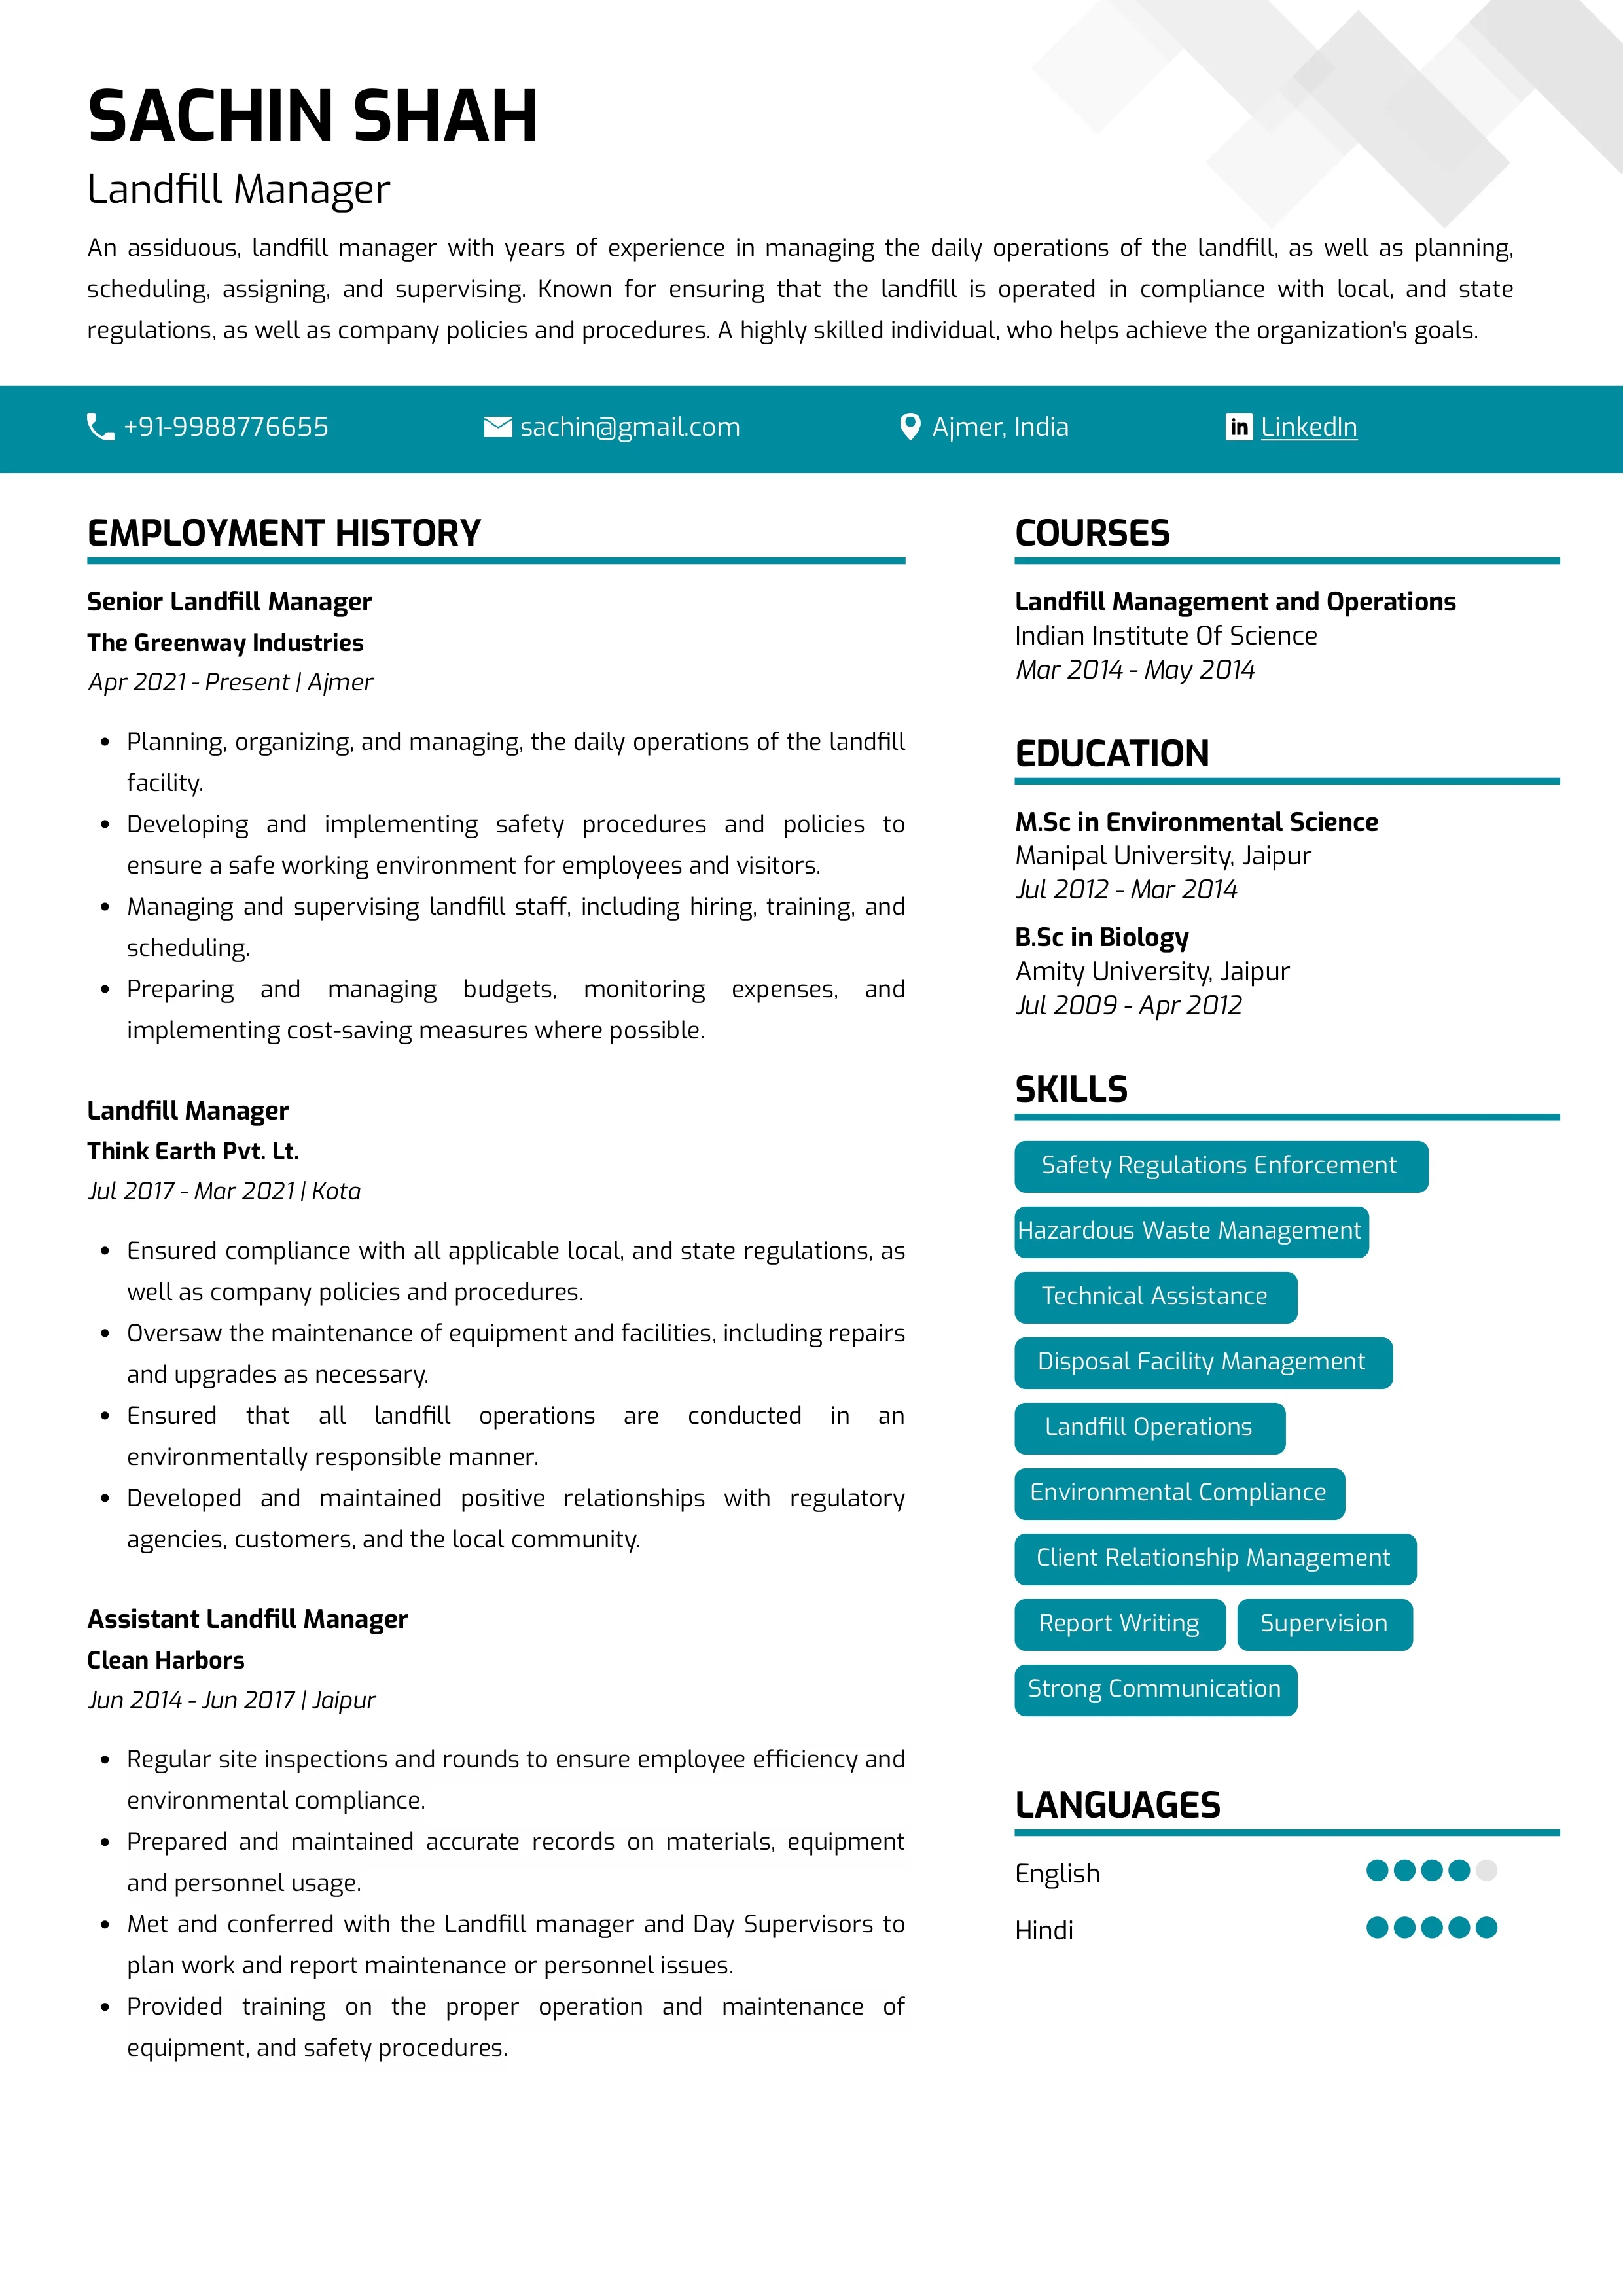 Sample Resume of Landfill Manager | Free Resume Templates & Samples on Resumod.co